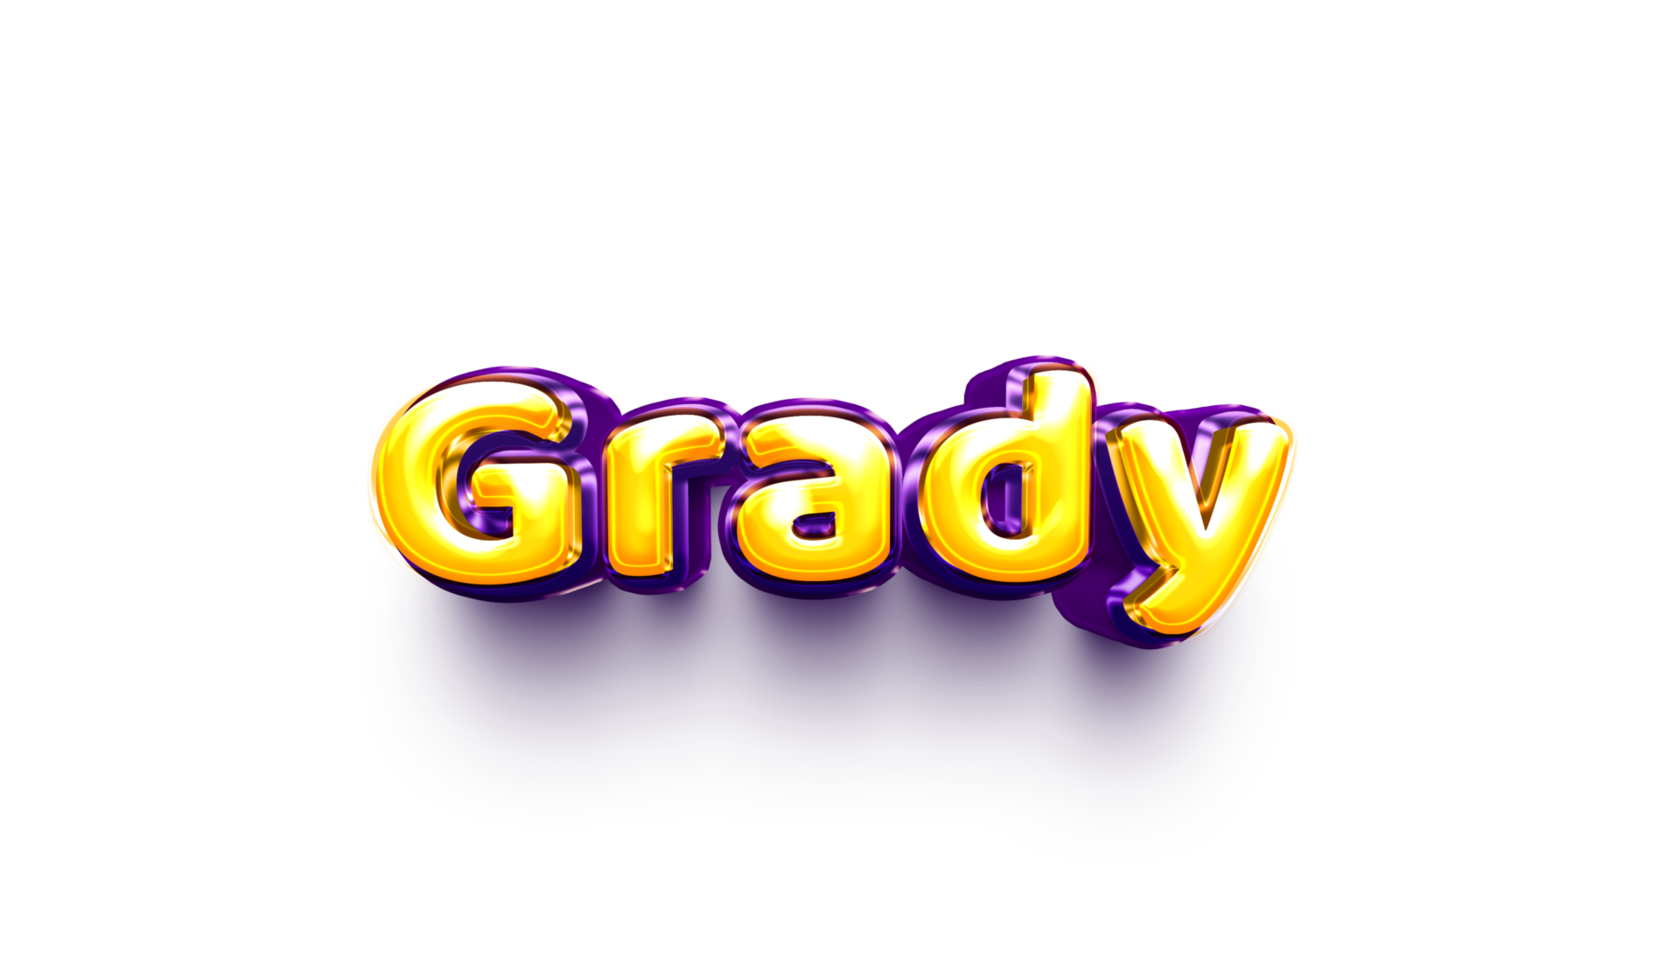 names of boys English helium balloon shiny celebration sticker 3d inflated Grady png